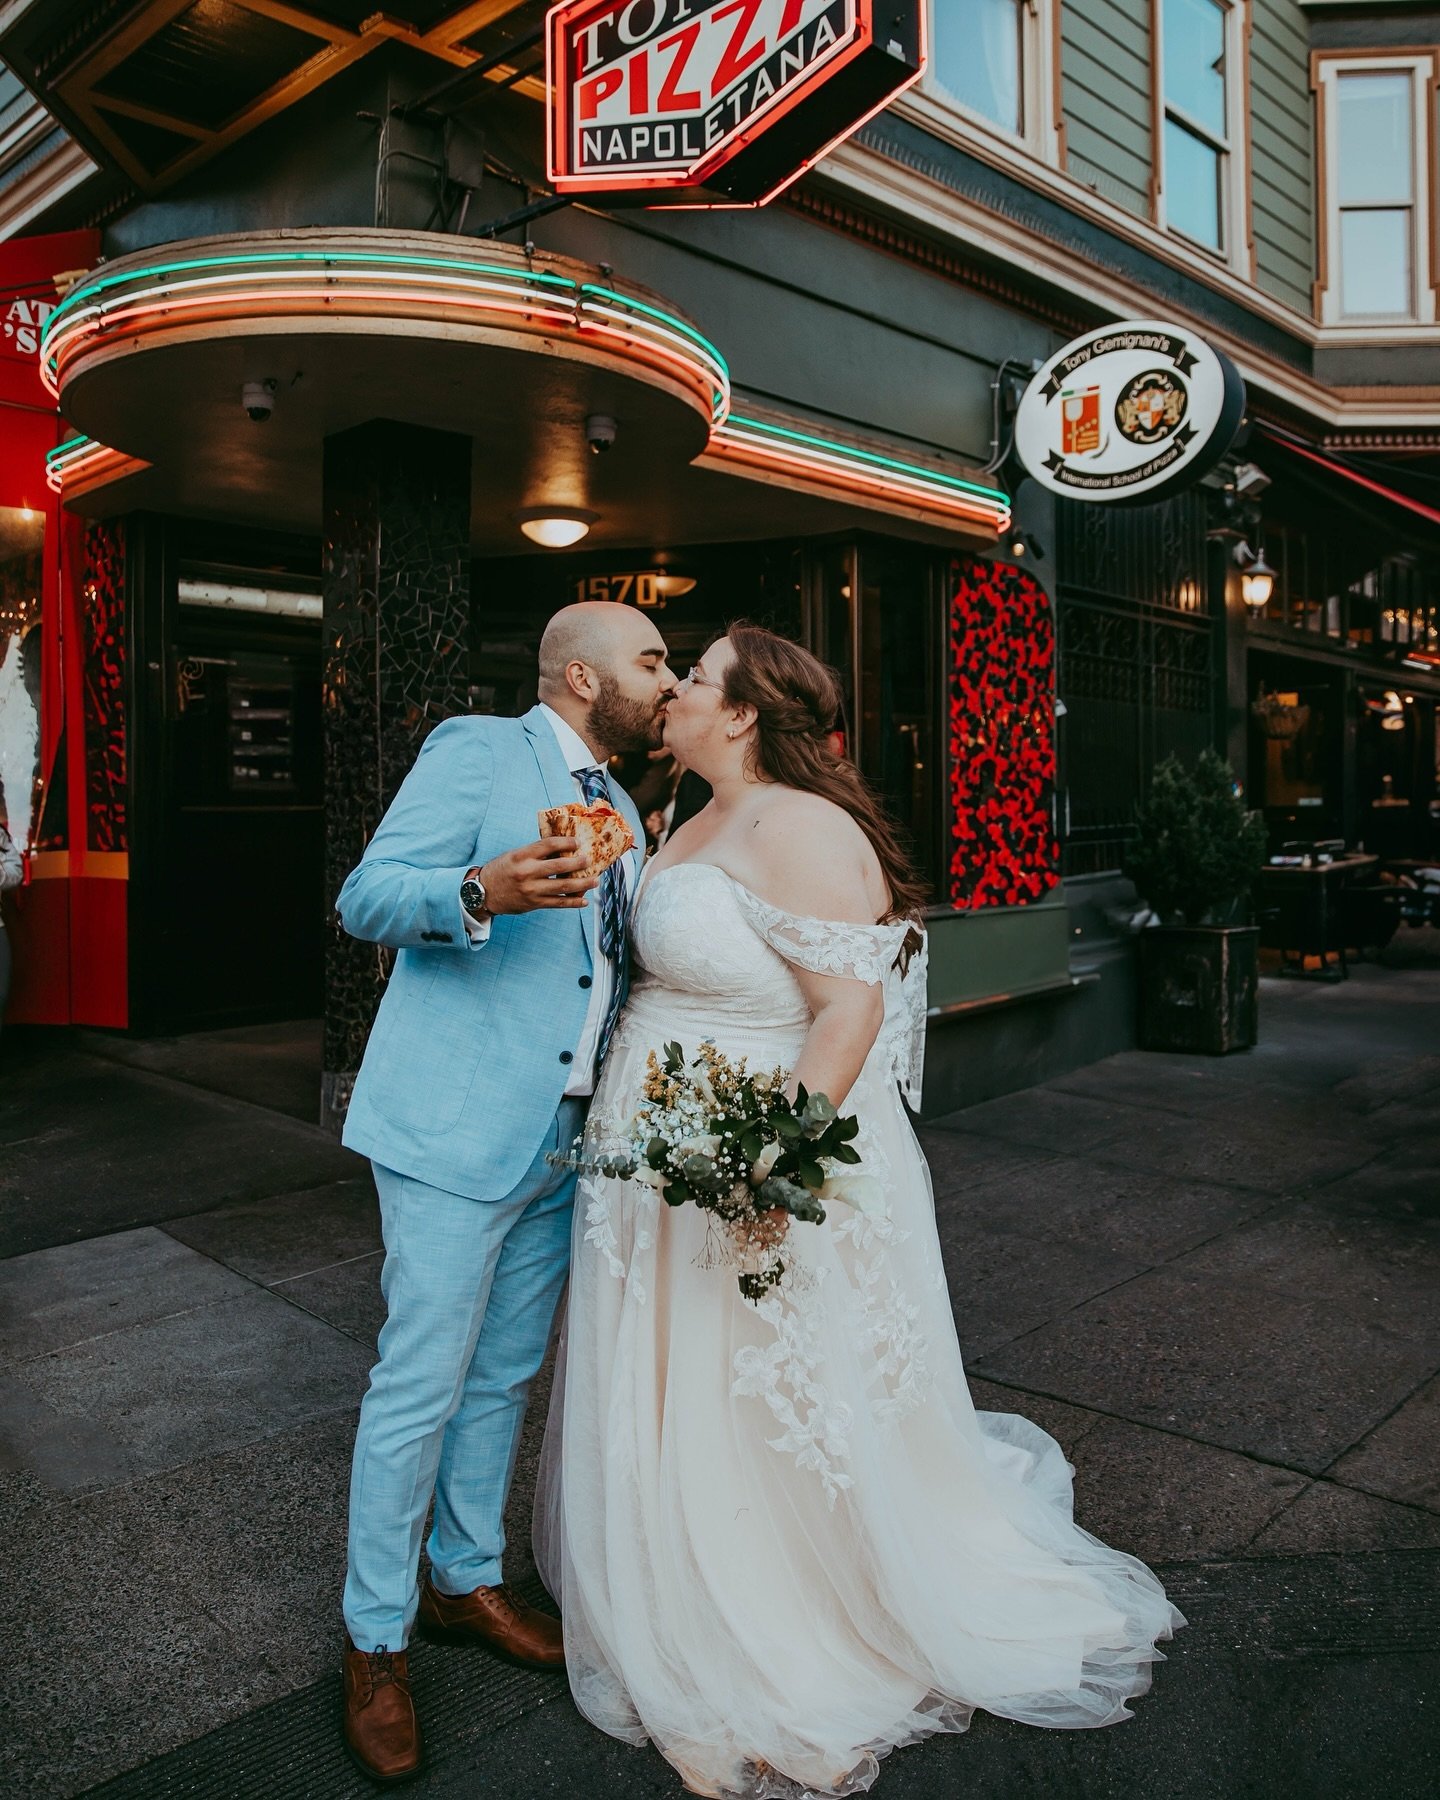 Pizza my heart forever &hearts;️

Couples who share a love for pizza on their wedding day are my kind of people 🍕